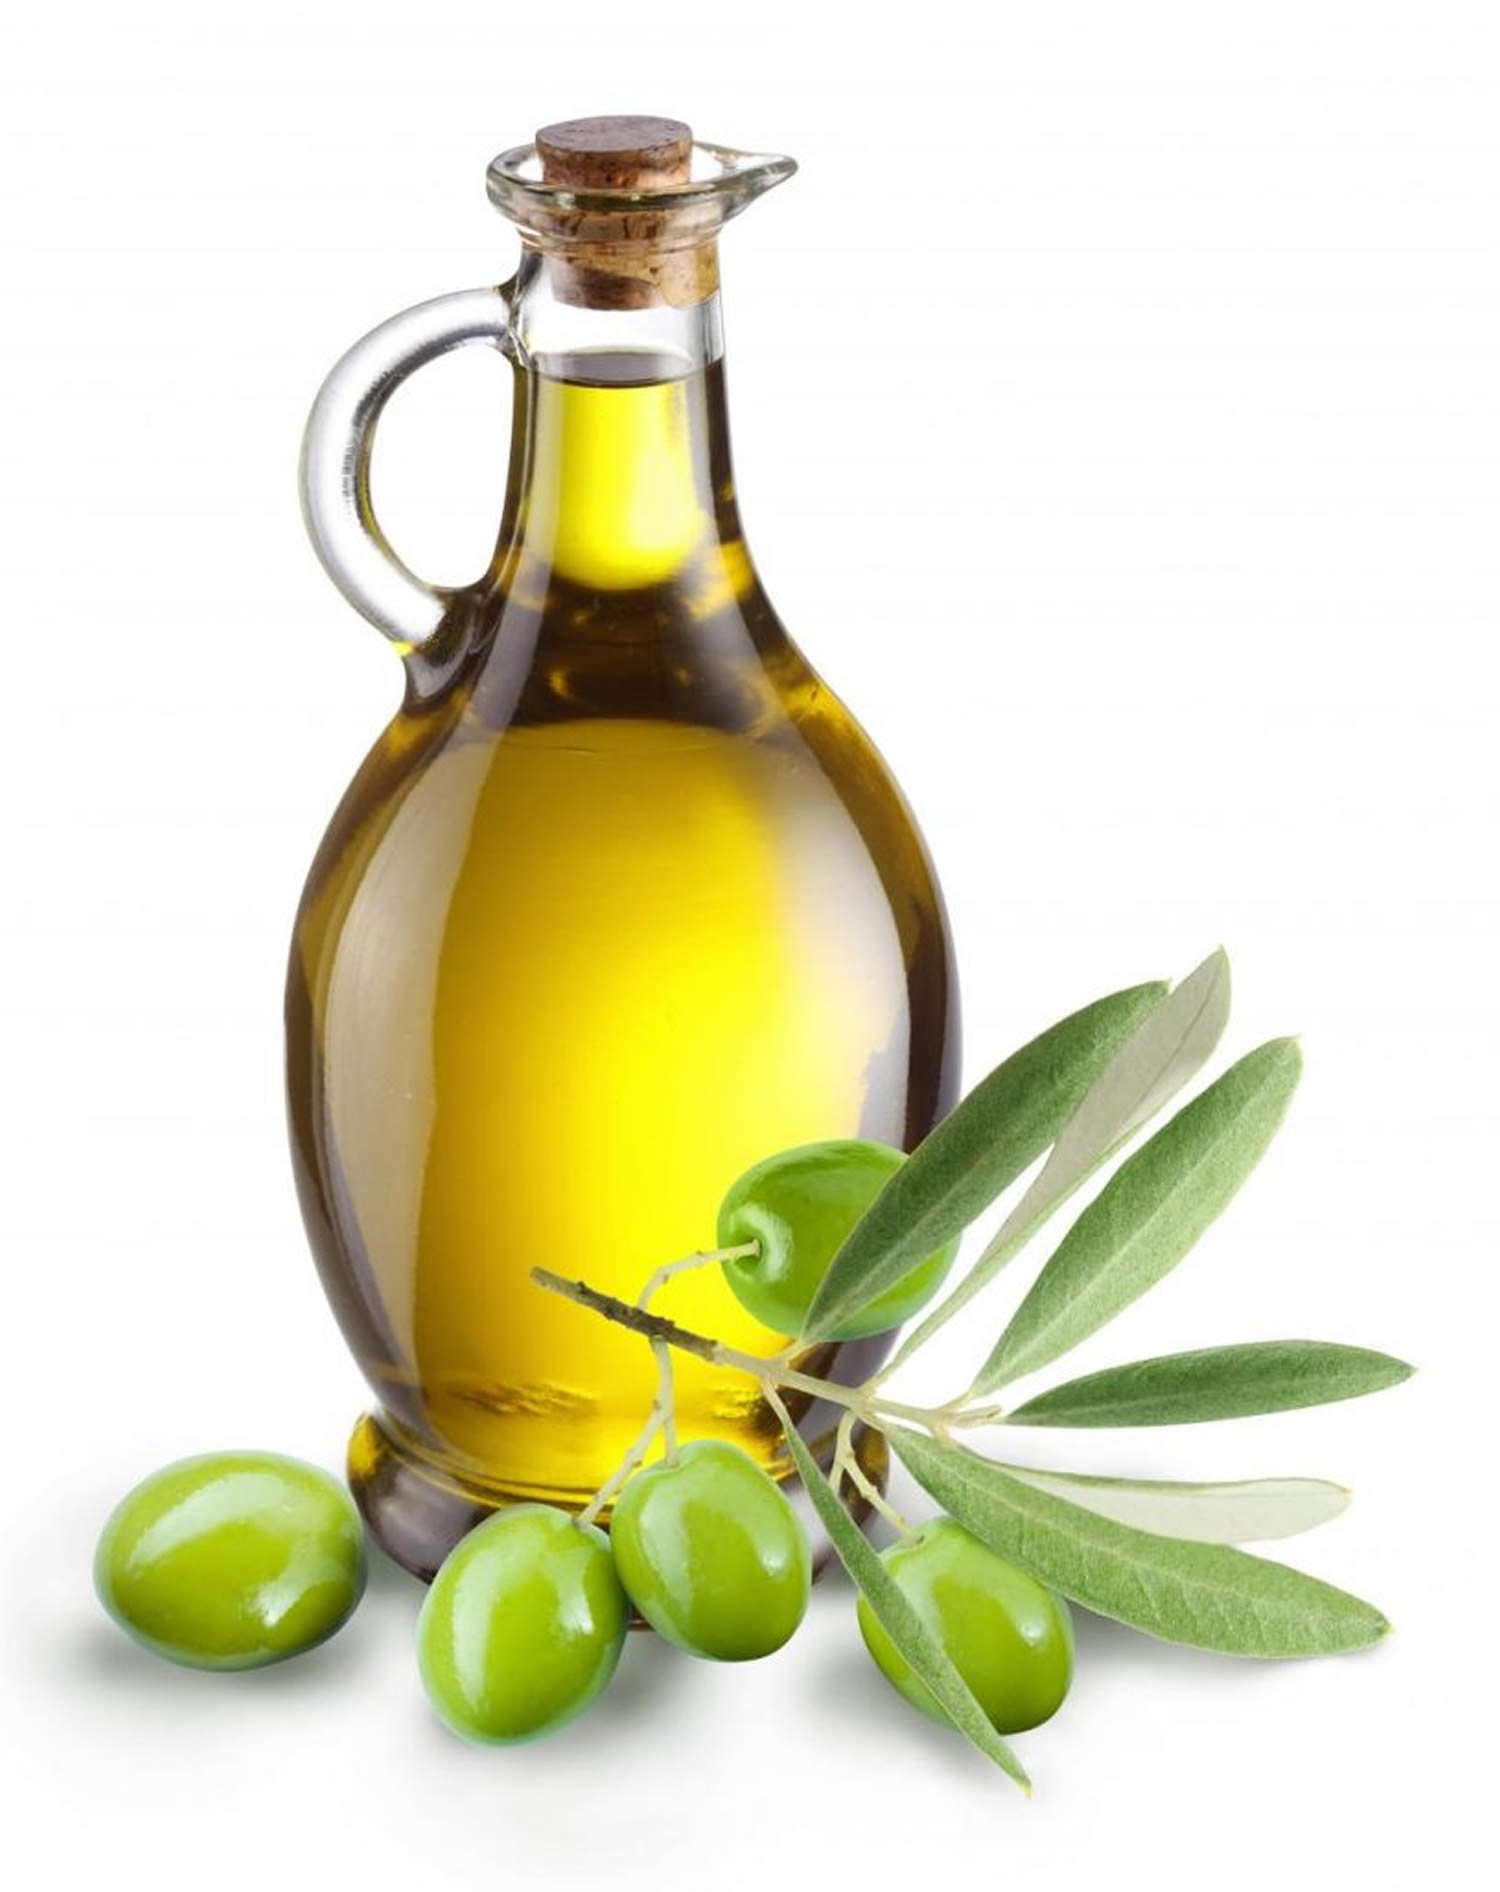 Find out what are the health benefits of extra virgin olive oil and its nut...